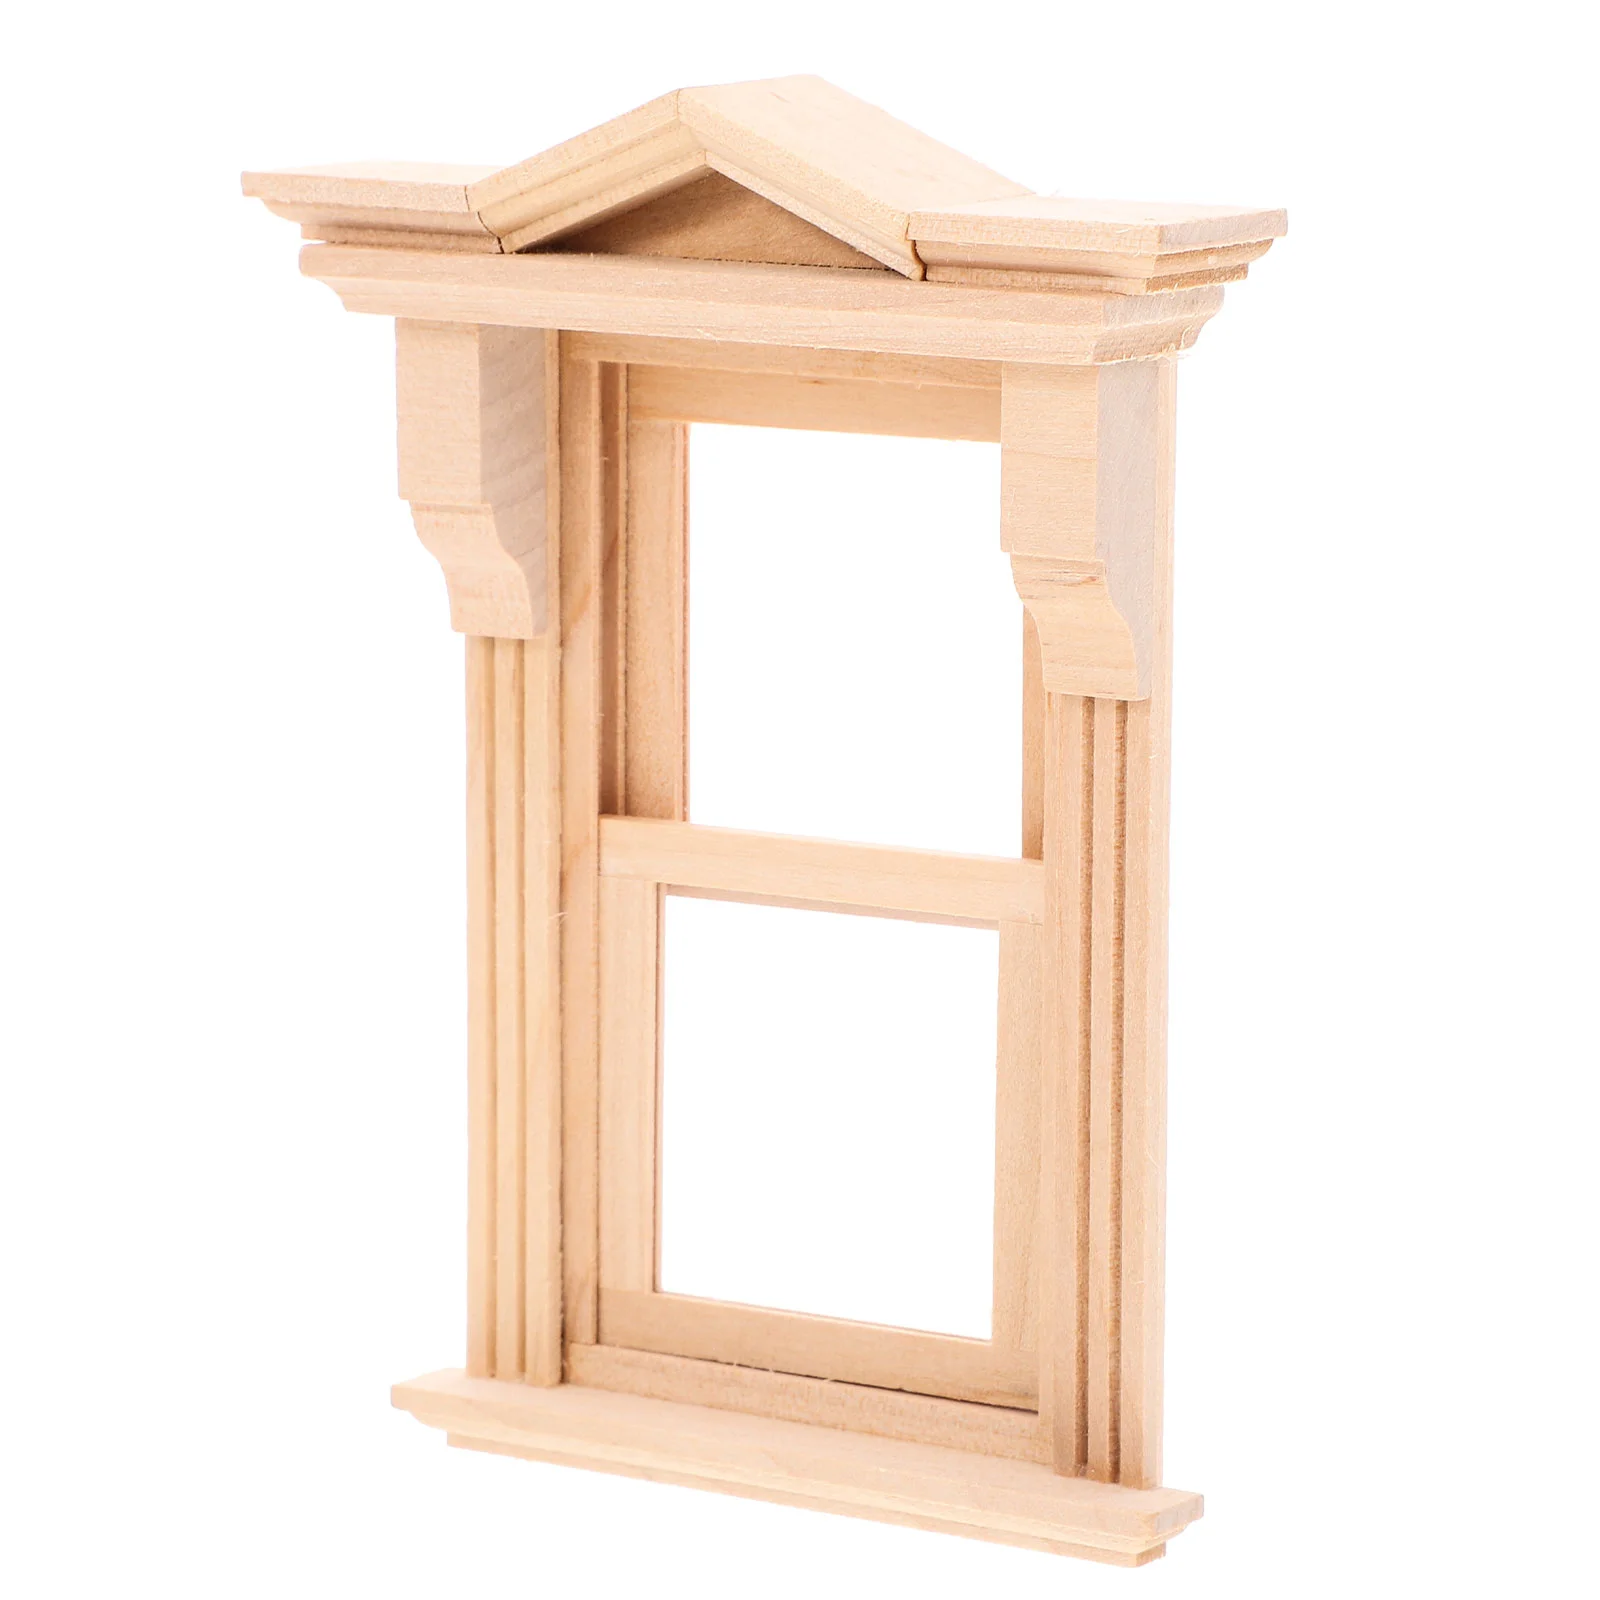 

Fairy House Window Miniature Doors and Windows Wooden Dollhouse Furniture Accessories